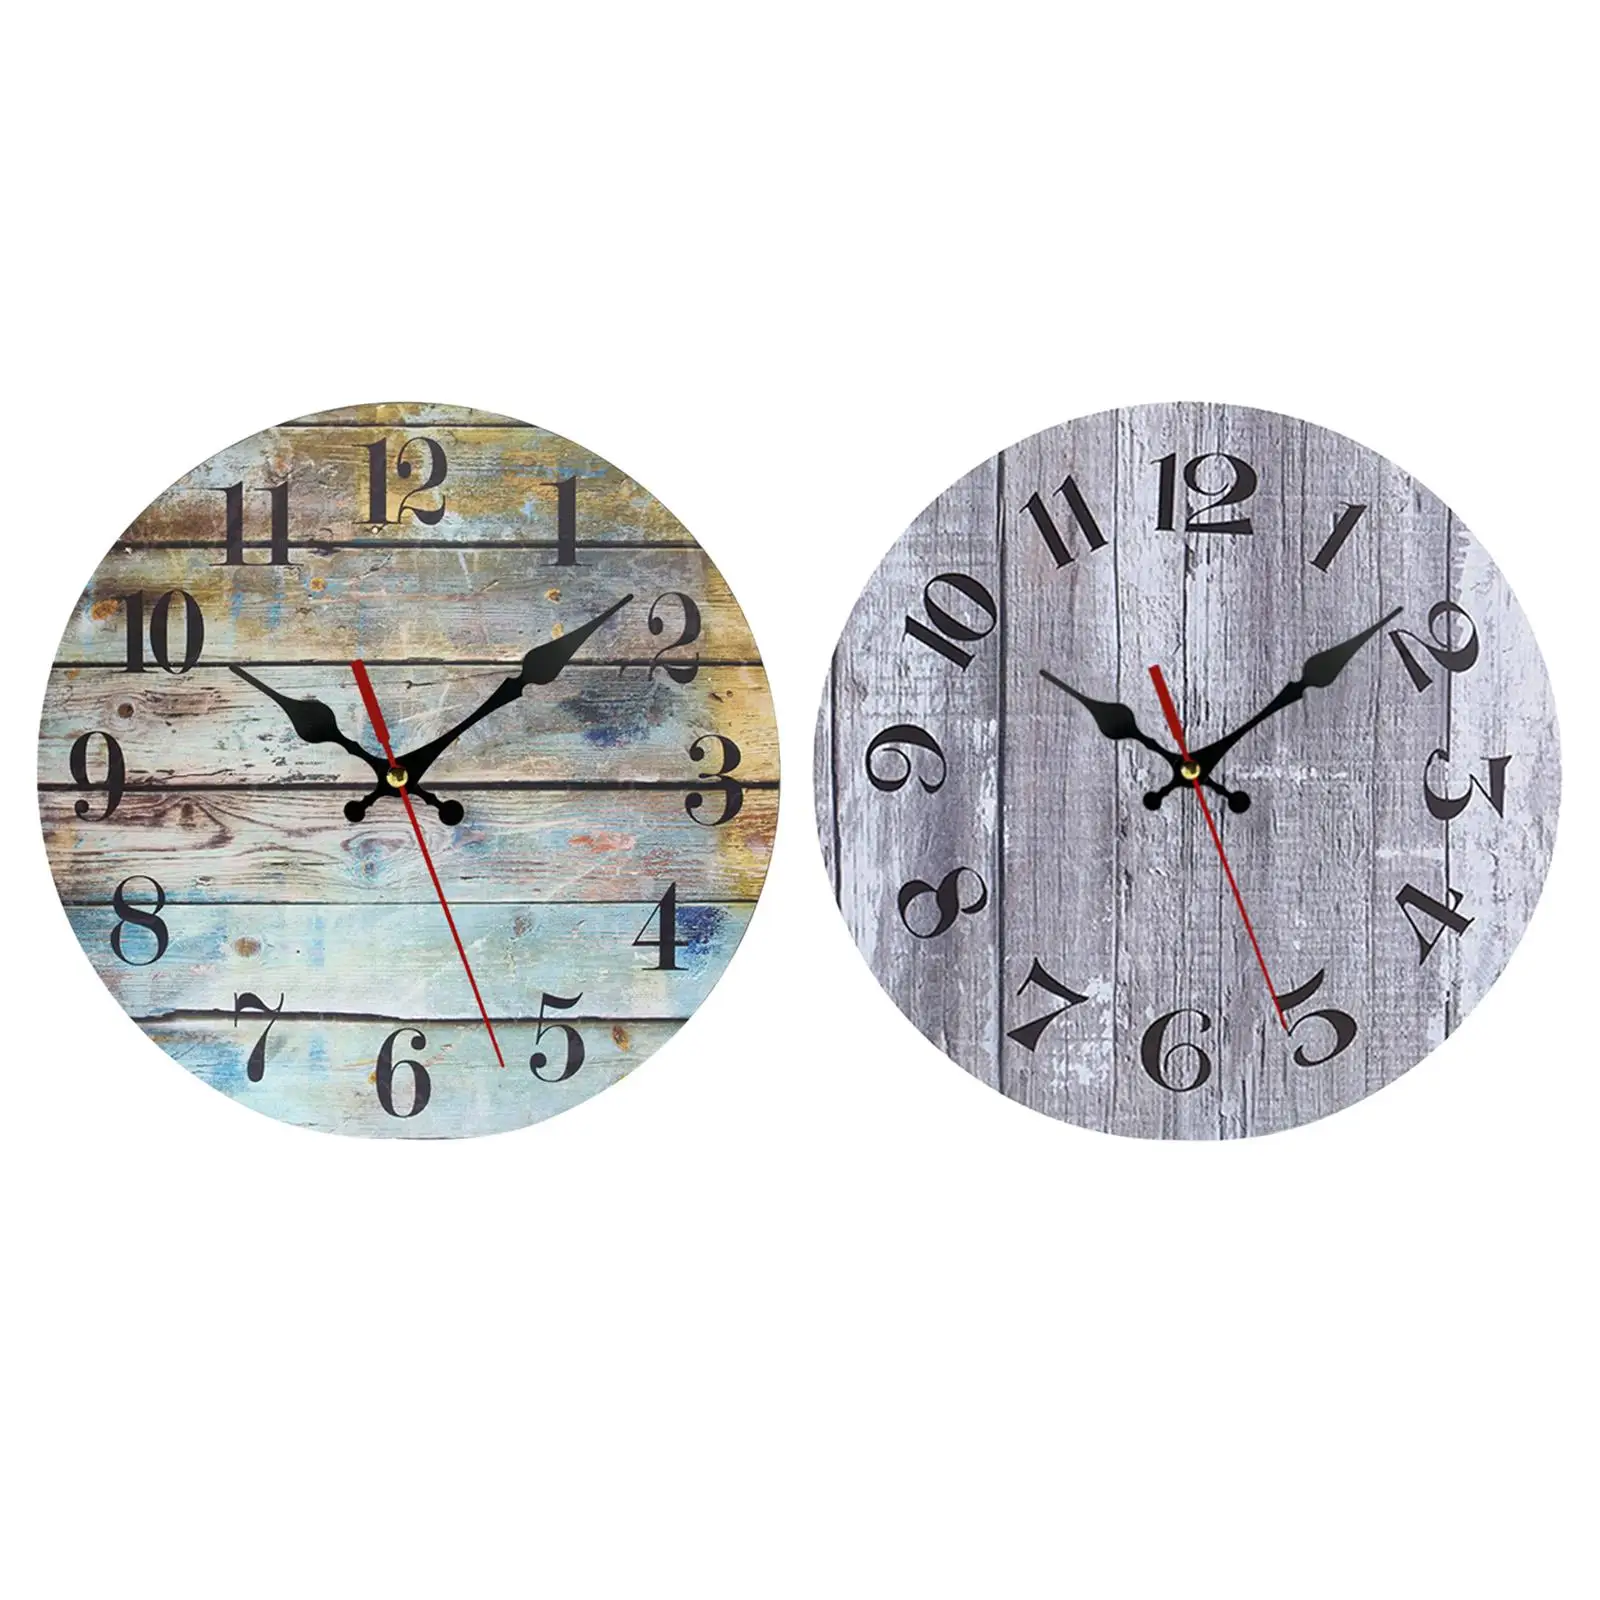 Rustic Hanging Clocks Battery Operated Silent Quartz Clock 9.8inch Wood Wall Clock for Farmhouse Bedroom Office Home Bedside